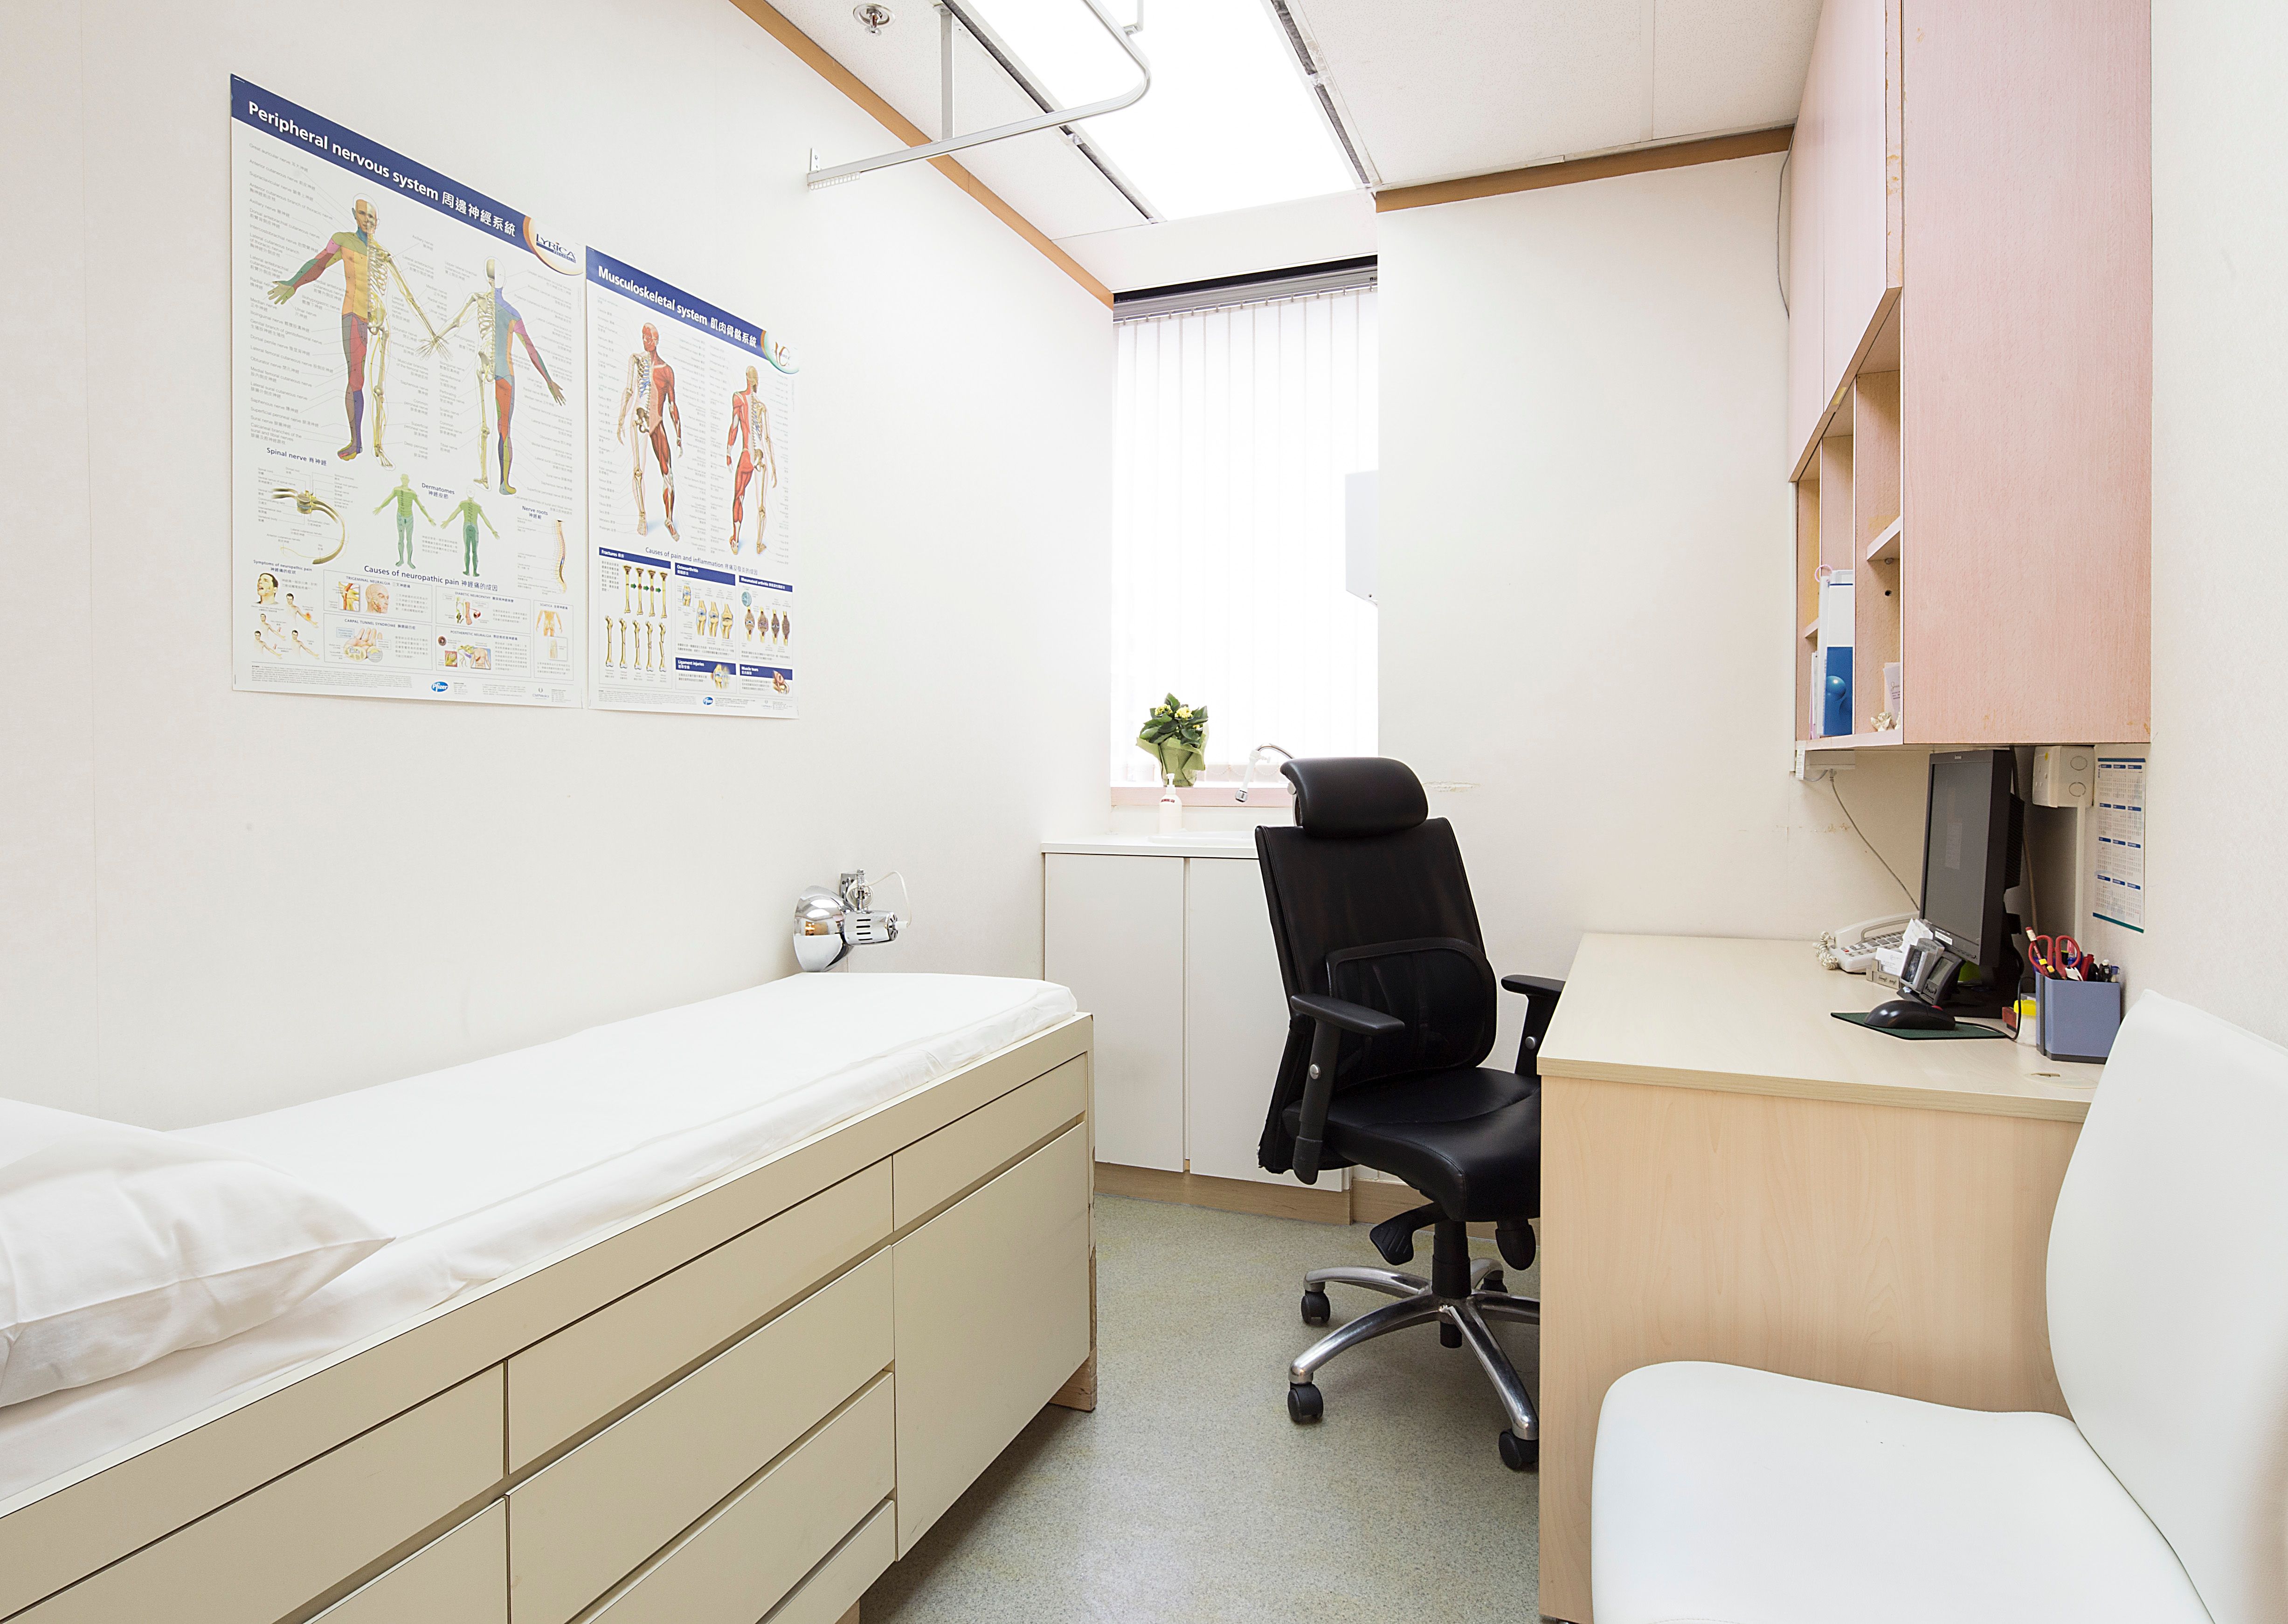 Consultation room with desk, bed, anatomy posters on the wall